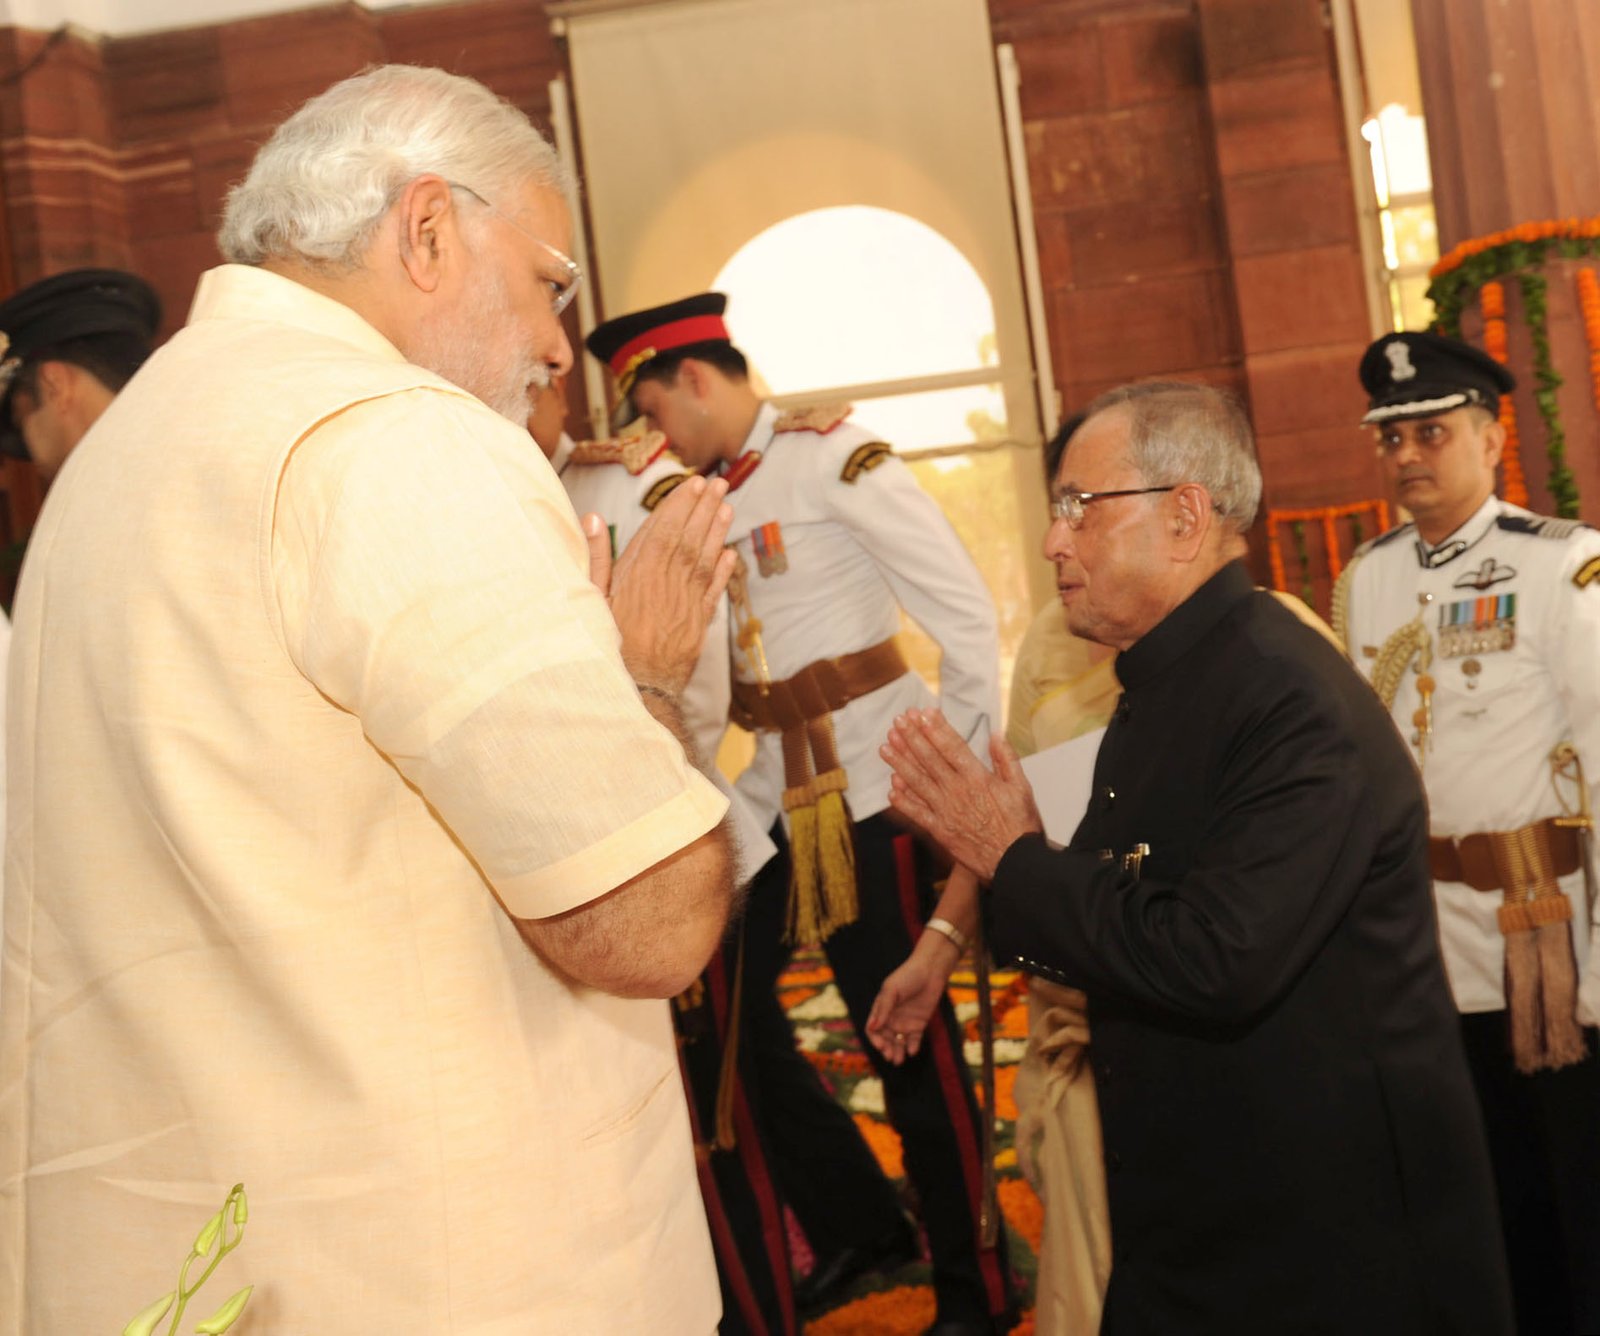 The President, Pranab Mukherjee being welcomed by the Prime Minister, Narendra Modi on his arrival at parliament house to attend the joint session of the parliament, in New Delhi on June 09, 2014.